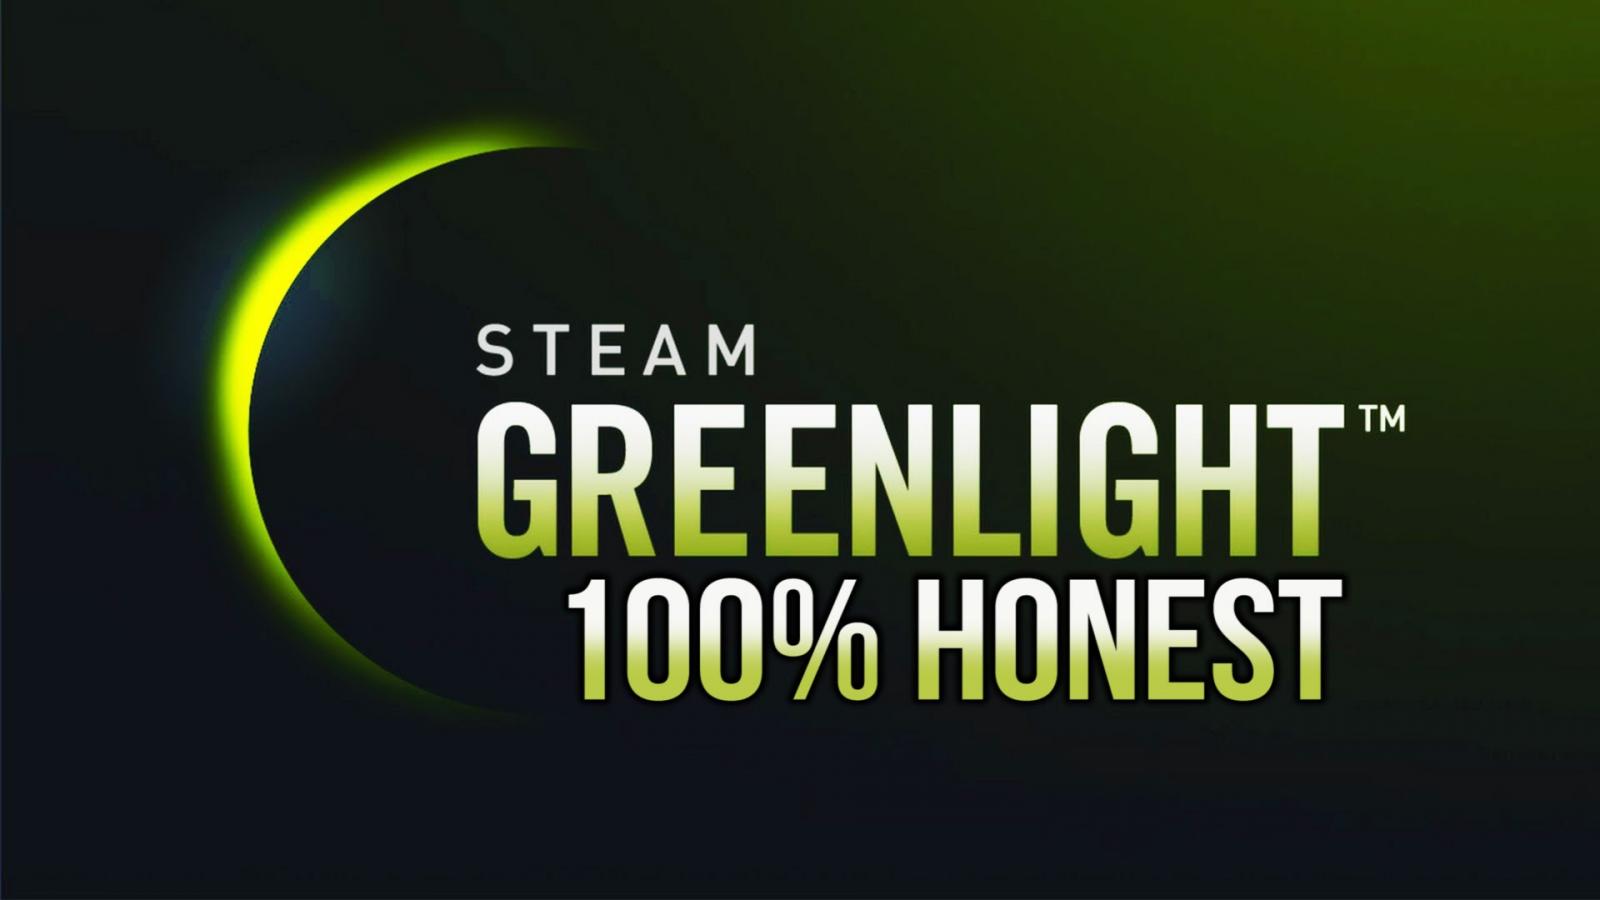 Steam and greenlight фото 3